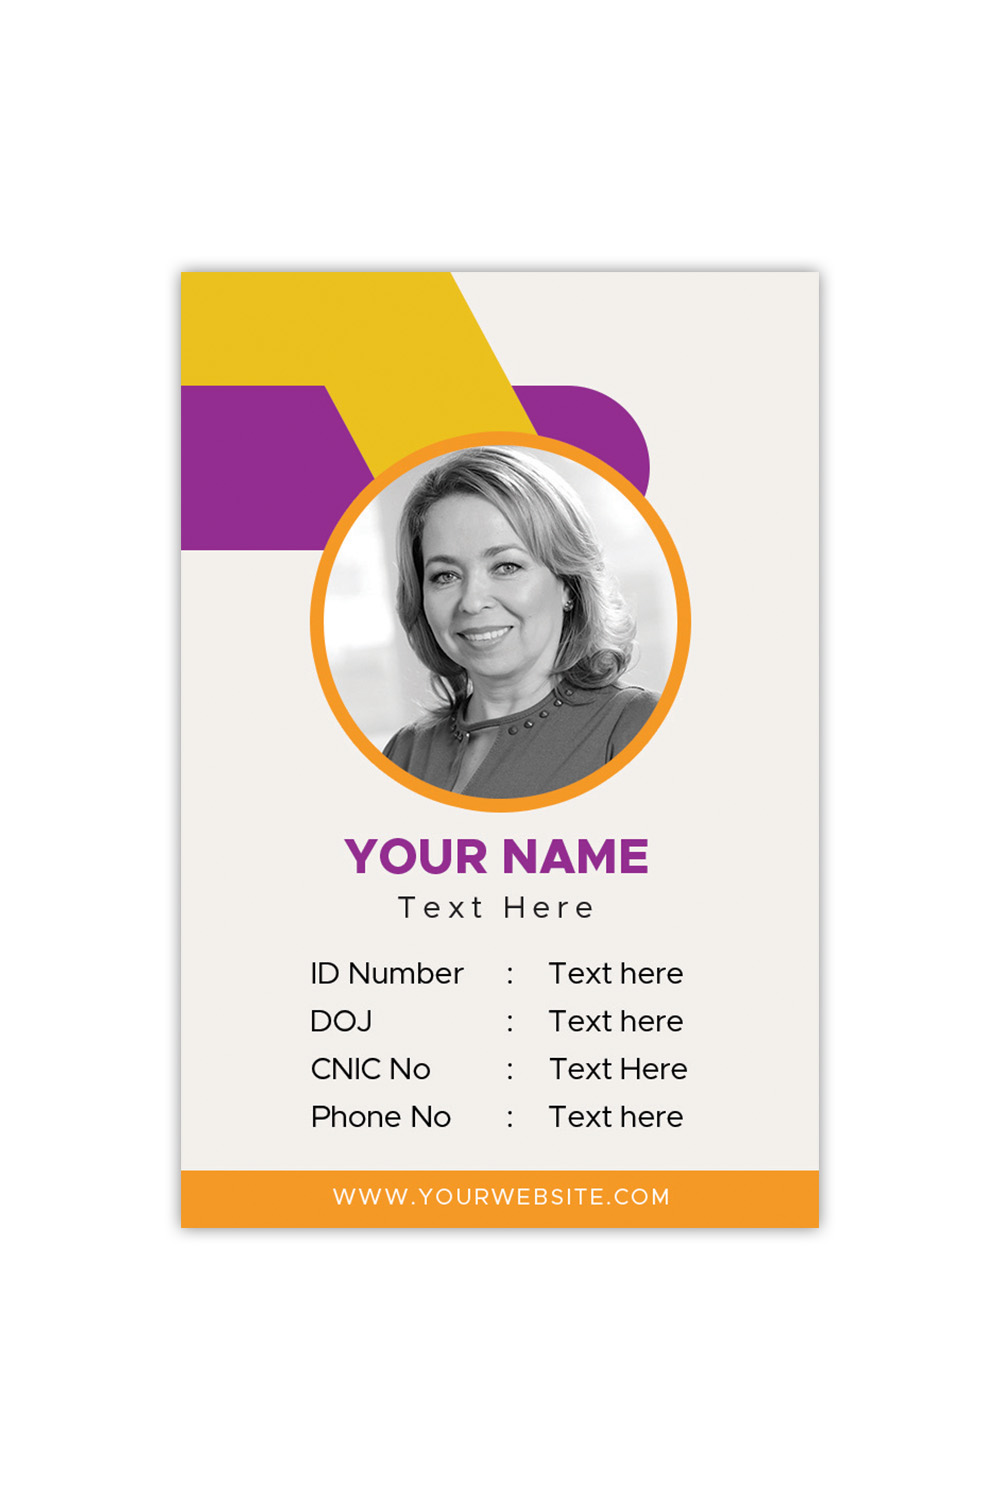 identity card or office card template pinterest preview image.